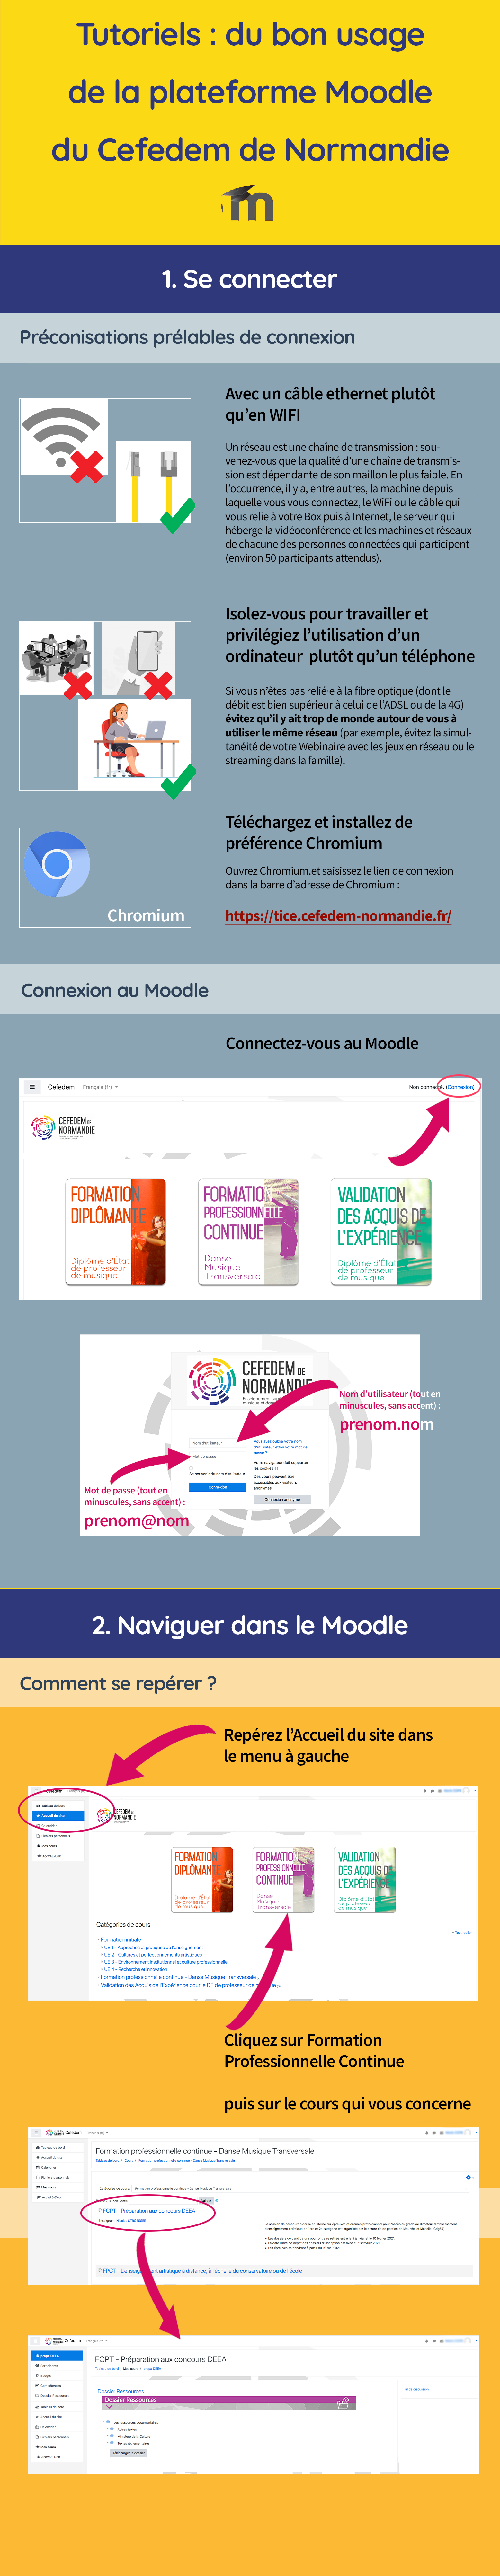 infographie tuto moodle